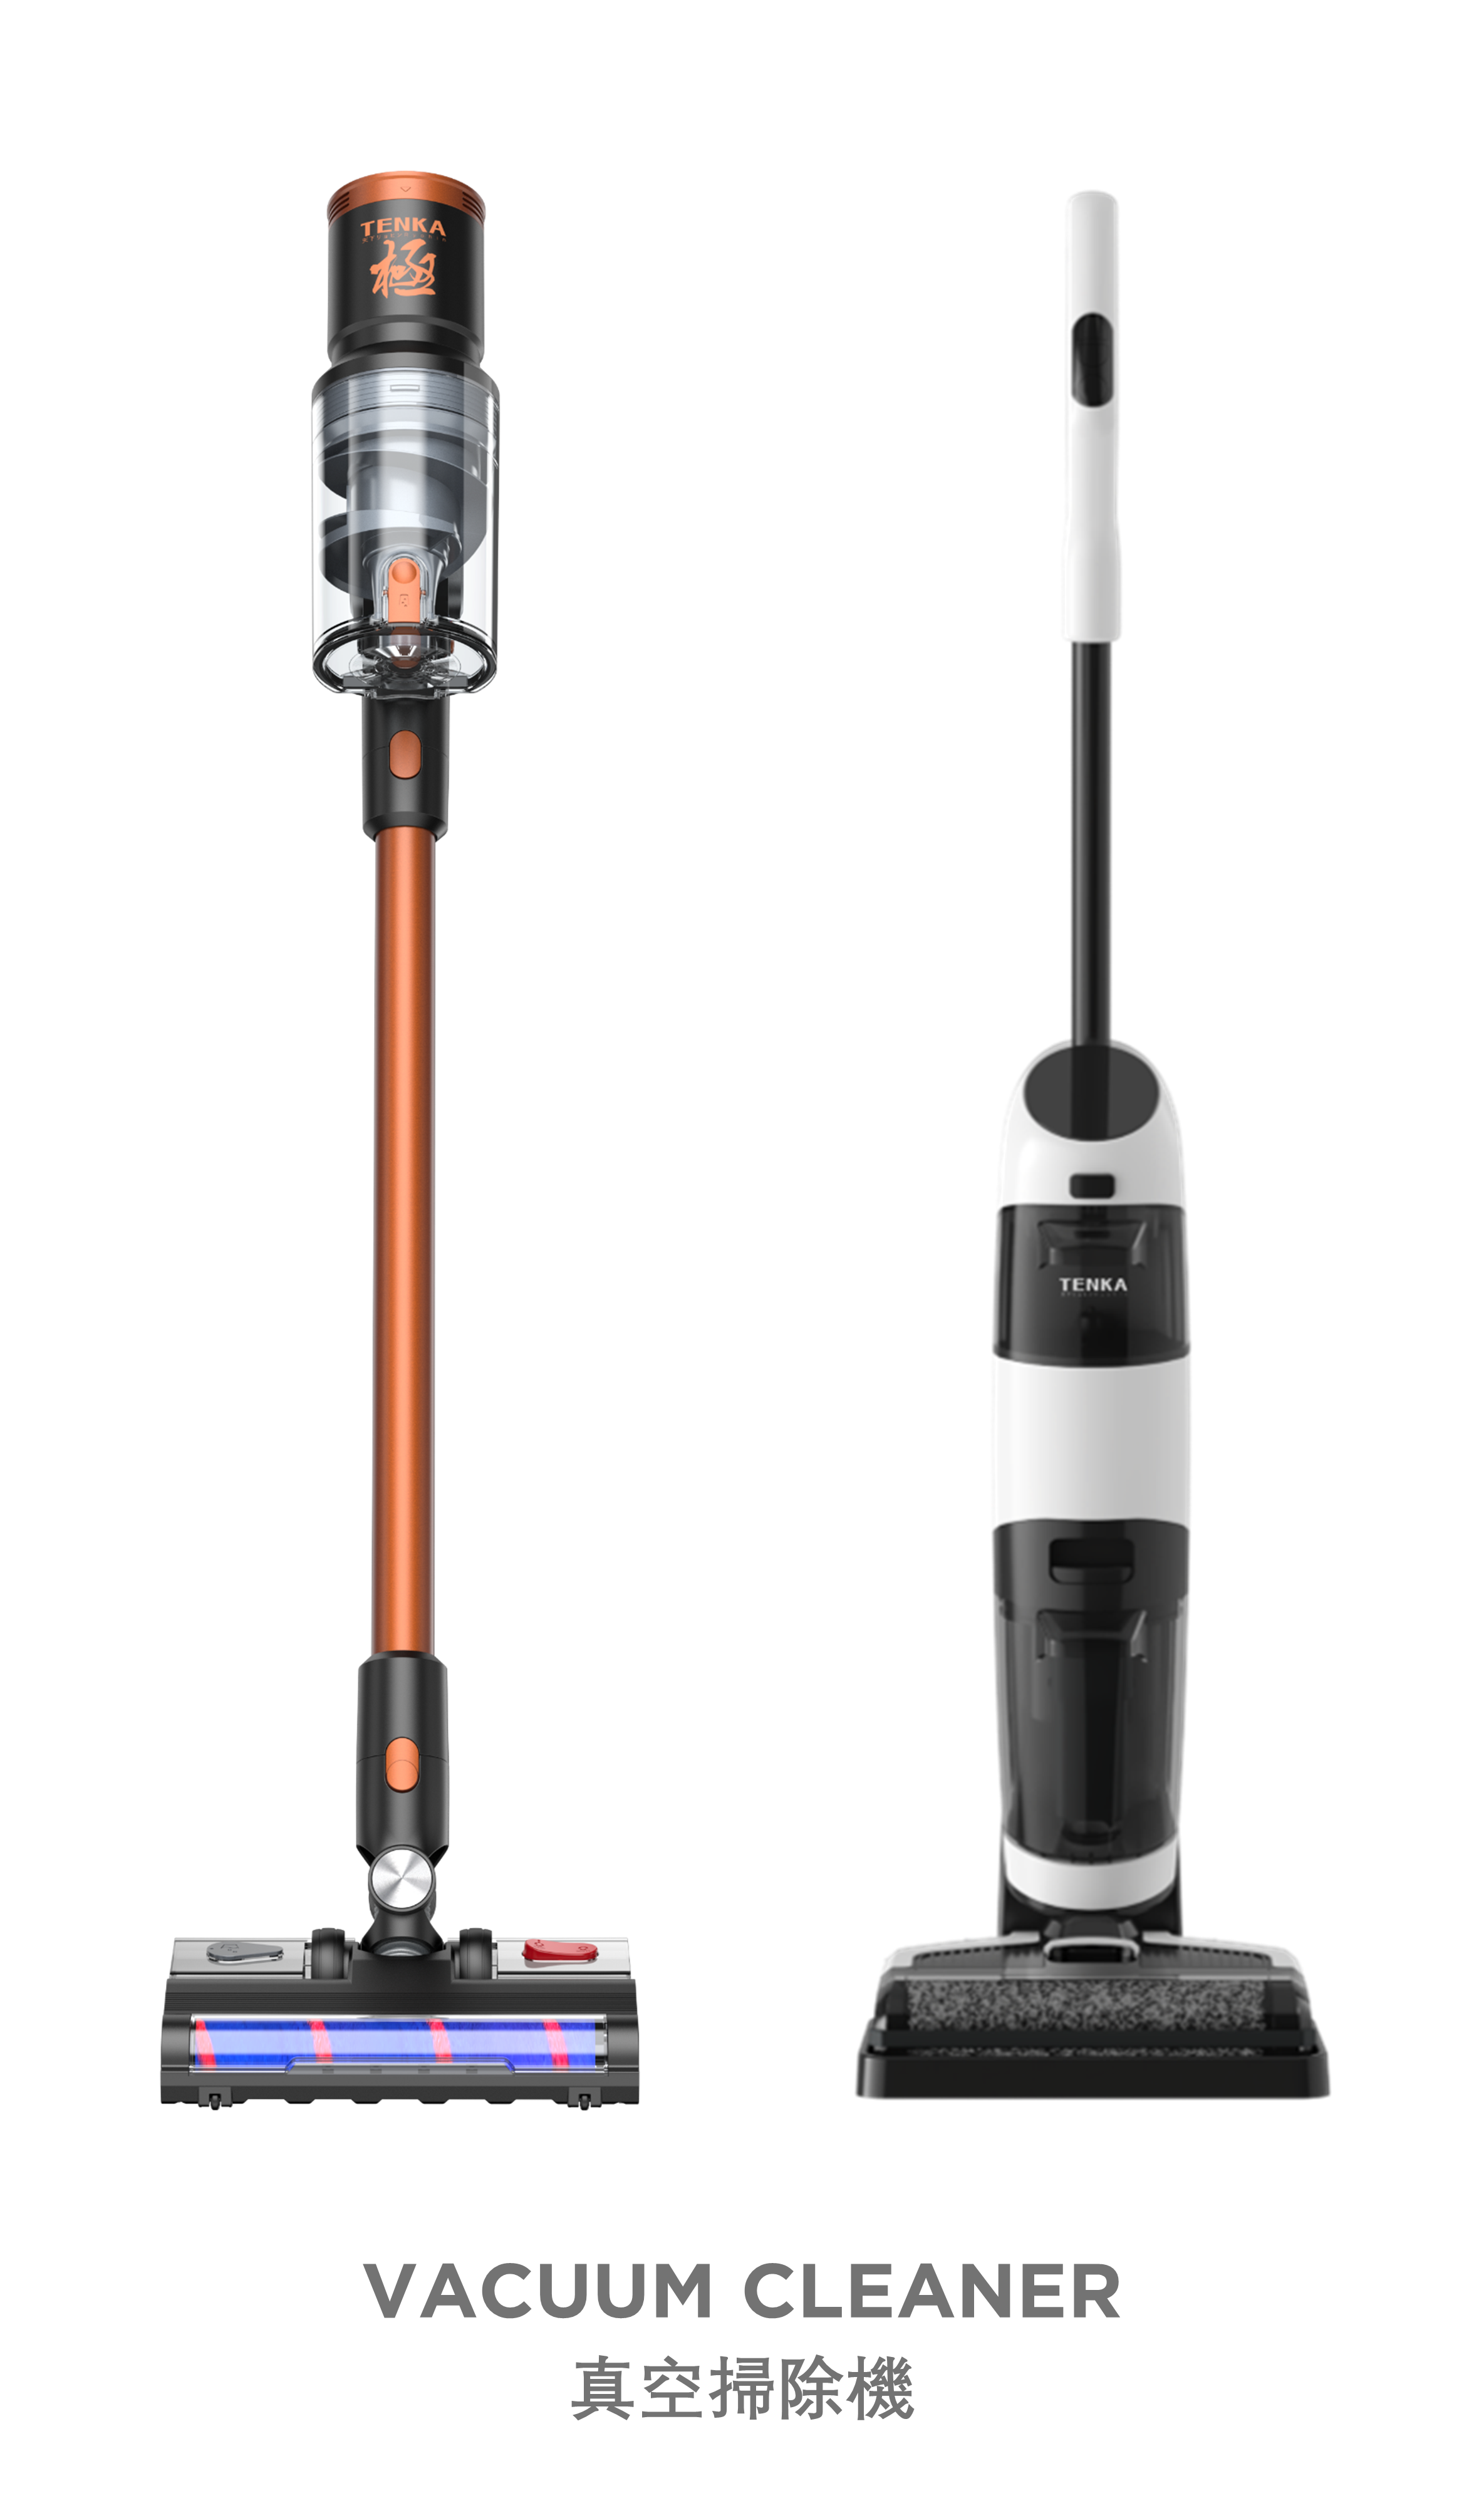 Product category - vacuum cleaner